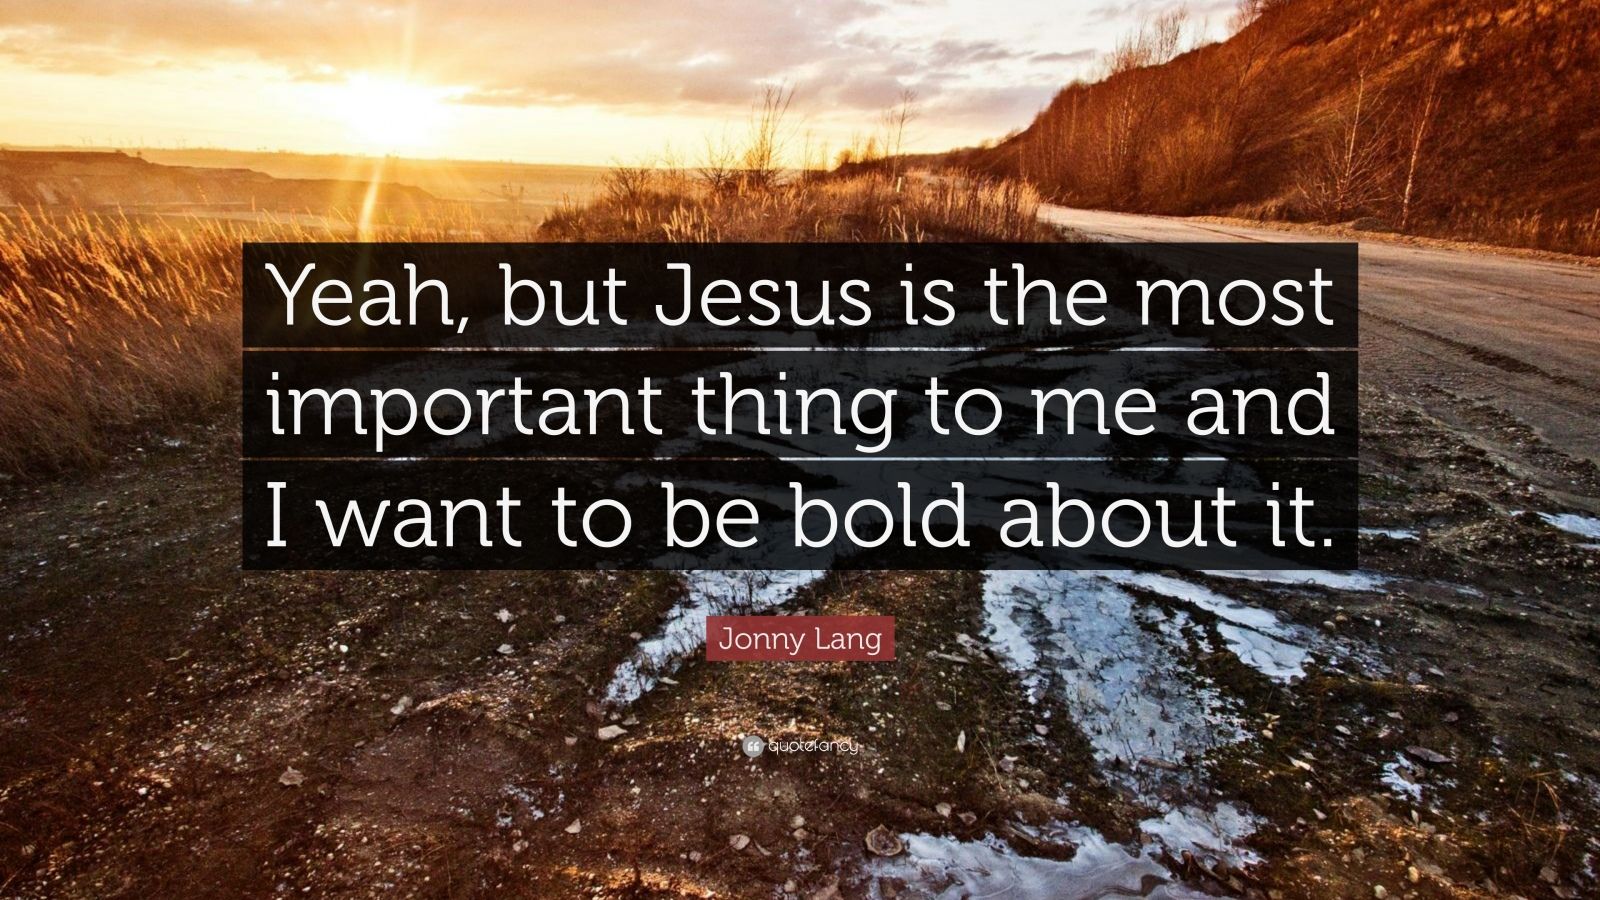 Jonny Lang Quote: “Yeah, but Jesus is the most important thing to me ...